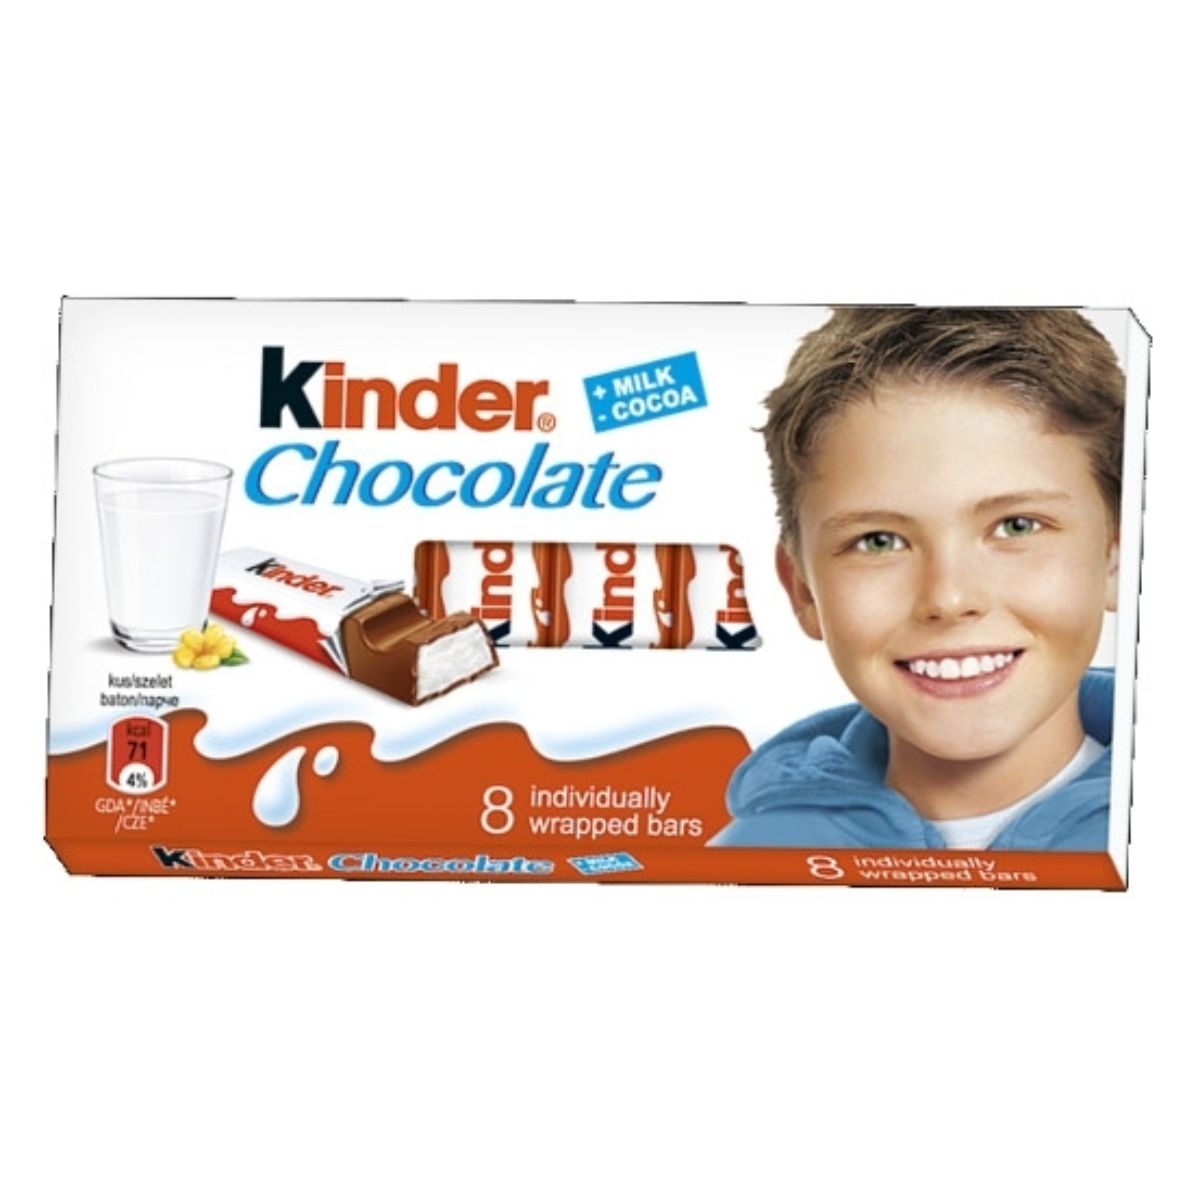 A box of Kinder - Chocolate - 100g featuring eight individually wrapped bars and an image of a smiling child on the packaging.